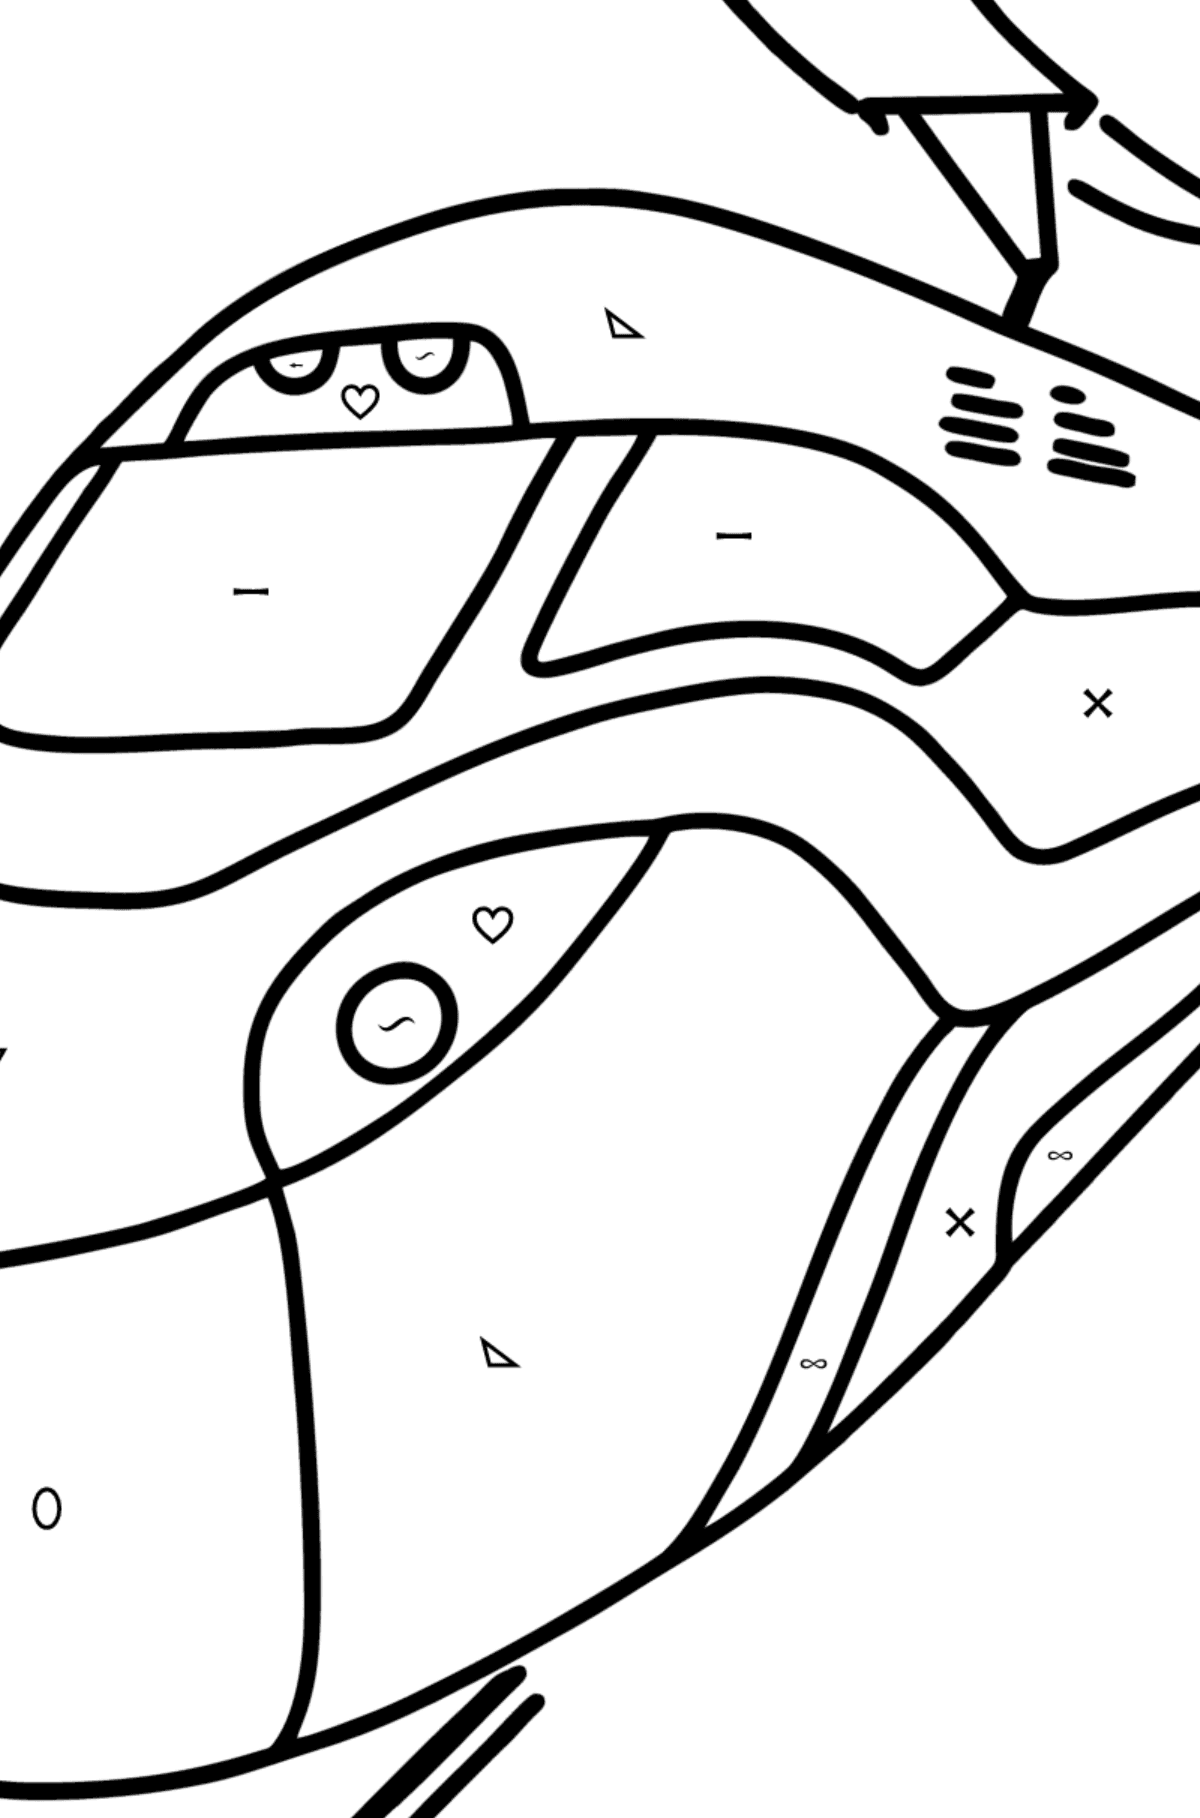 Train coloring page online - Coloring by Symbols and Geometric Shapes for Kids